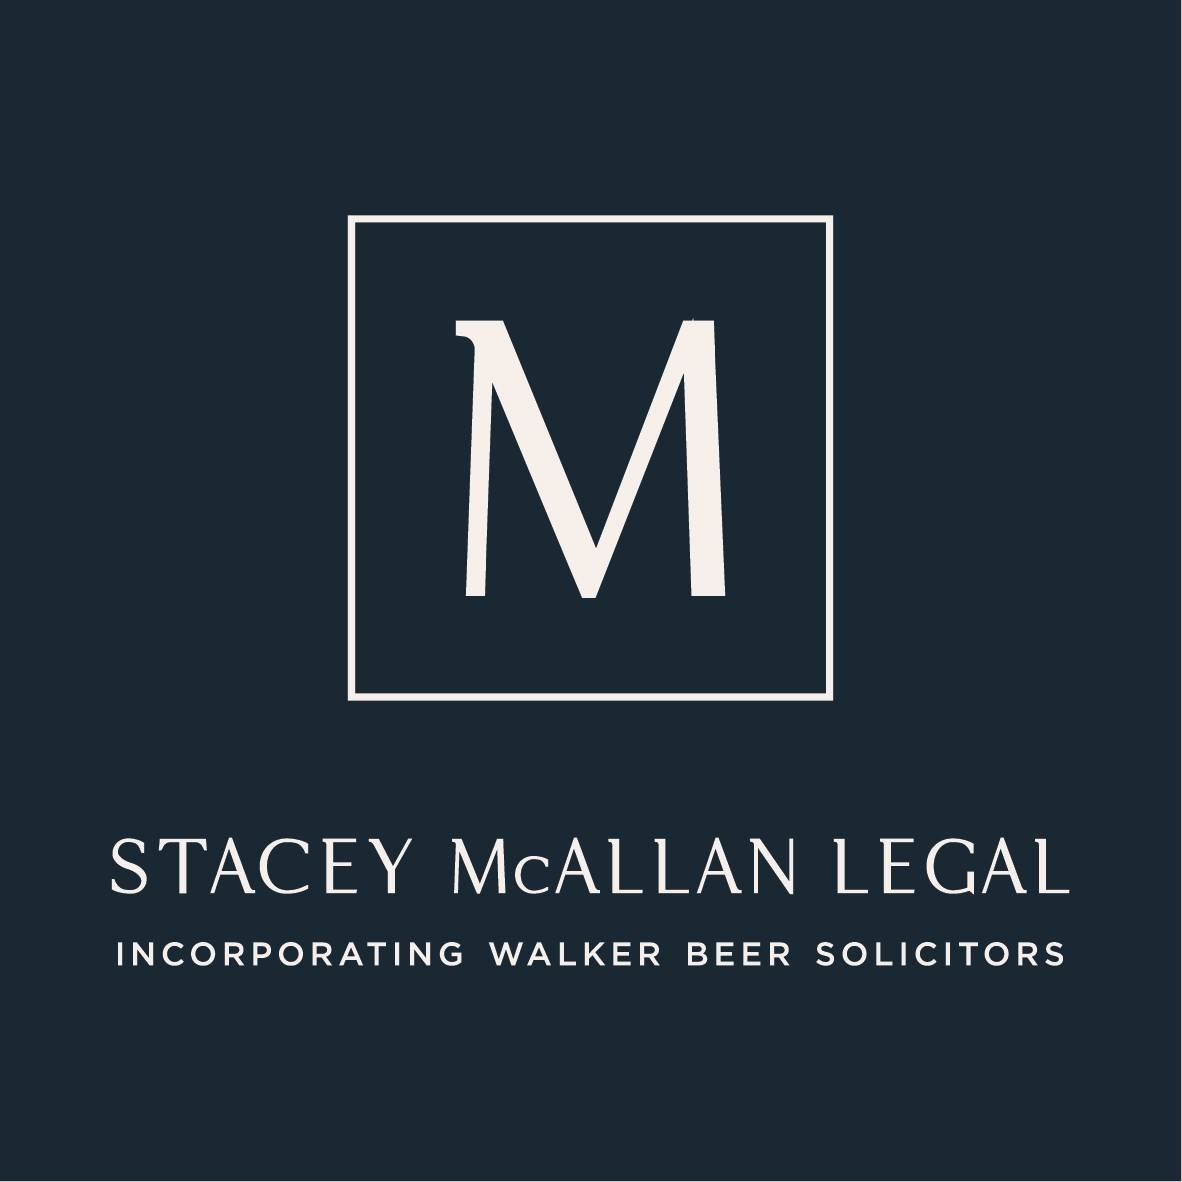 Company logo of Stacey McAllan Legal incorporating Walker Beer Solicitors